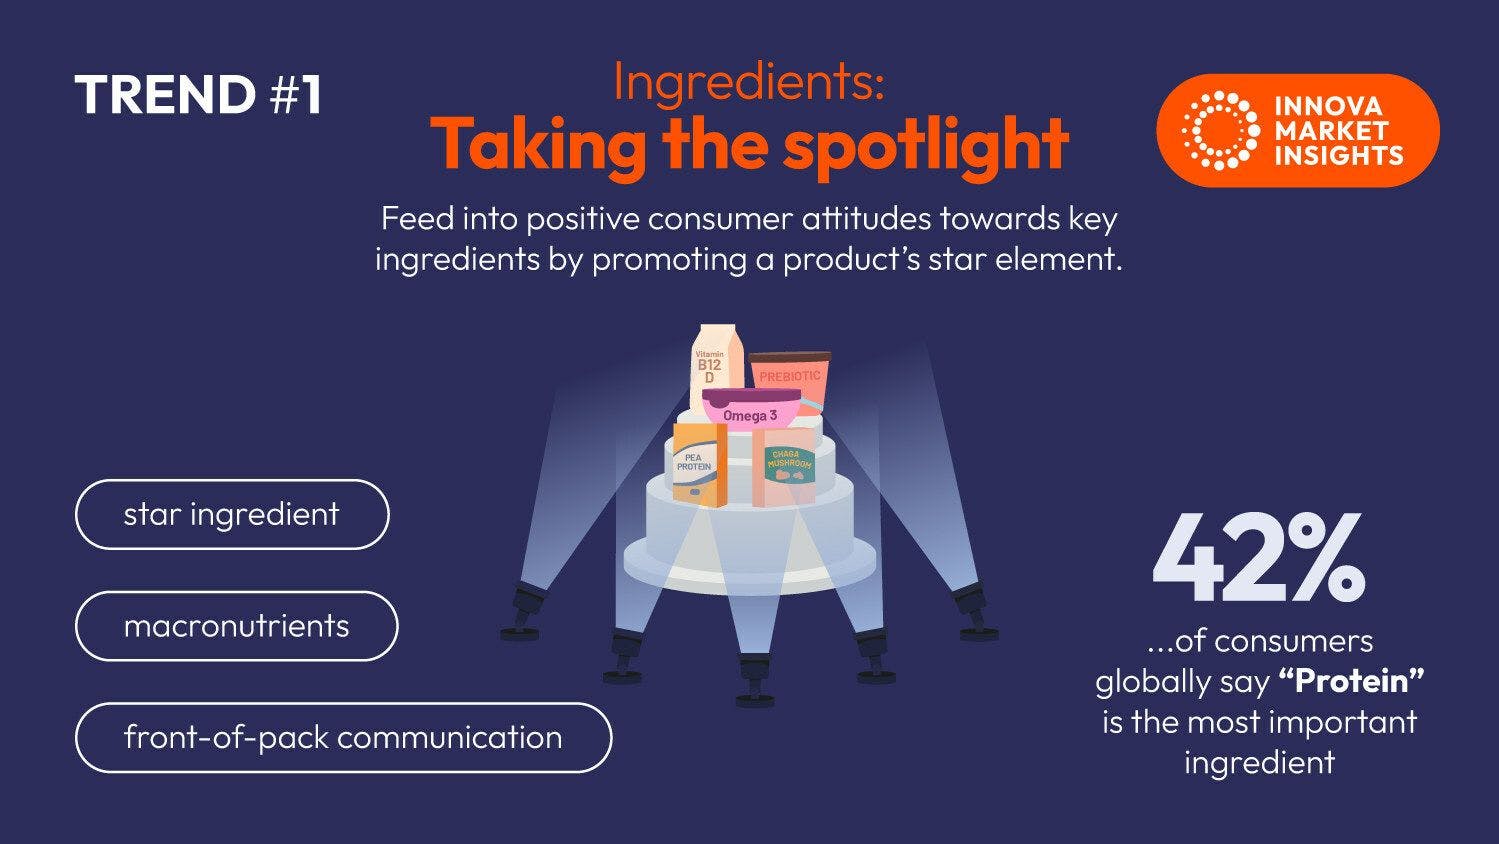 Key ingredient stars, nature-friendly claims, and health benefits will lead consumers’ food and drink demands in 2024, predicts Innova Market Insights